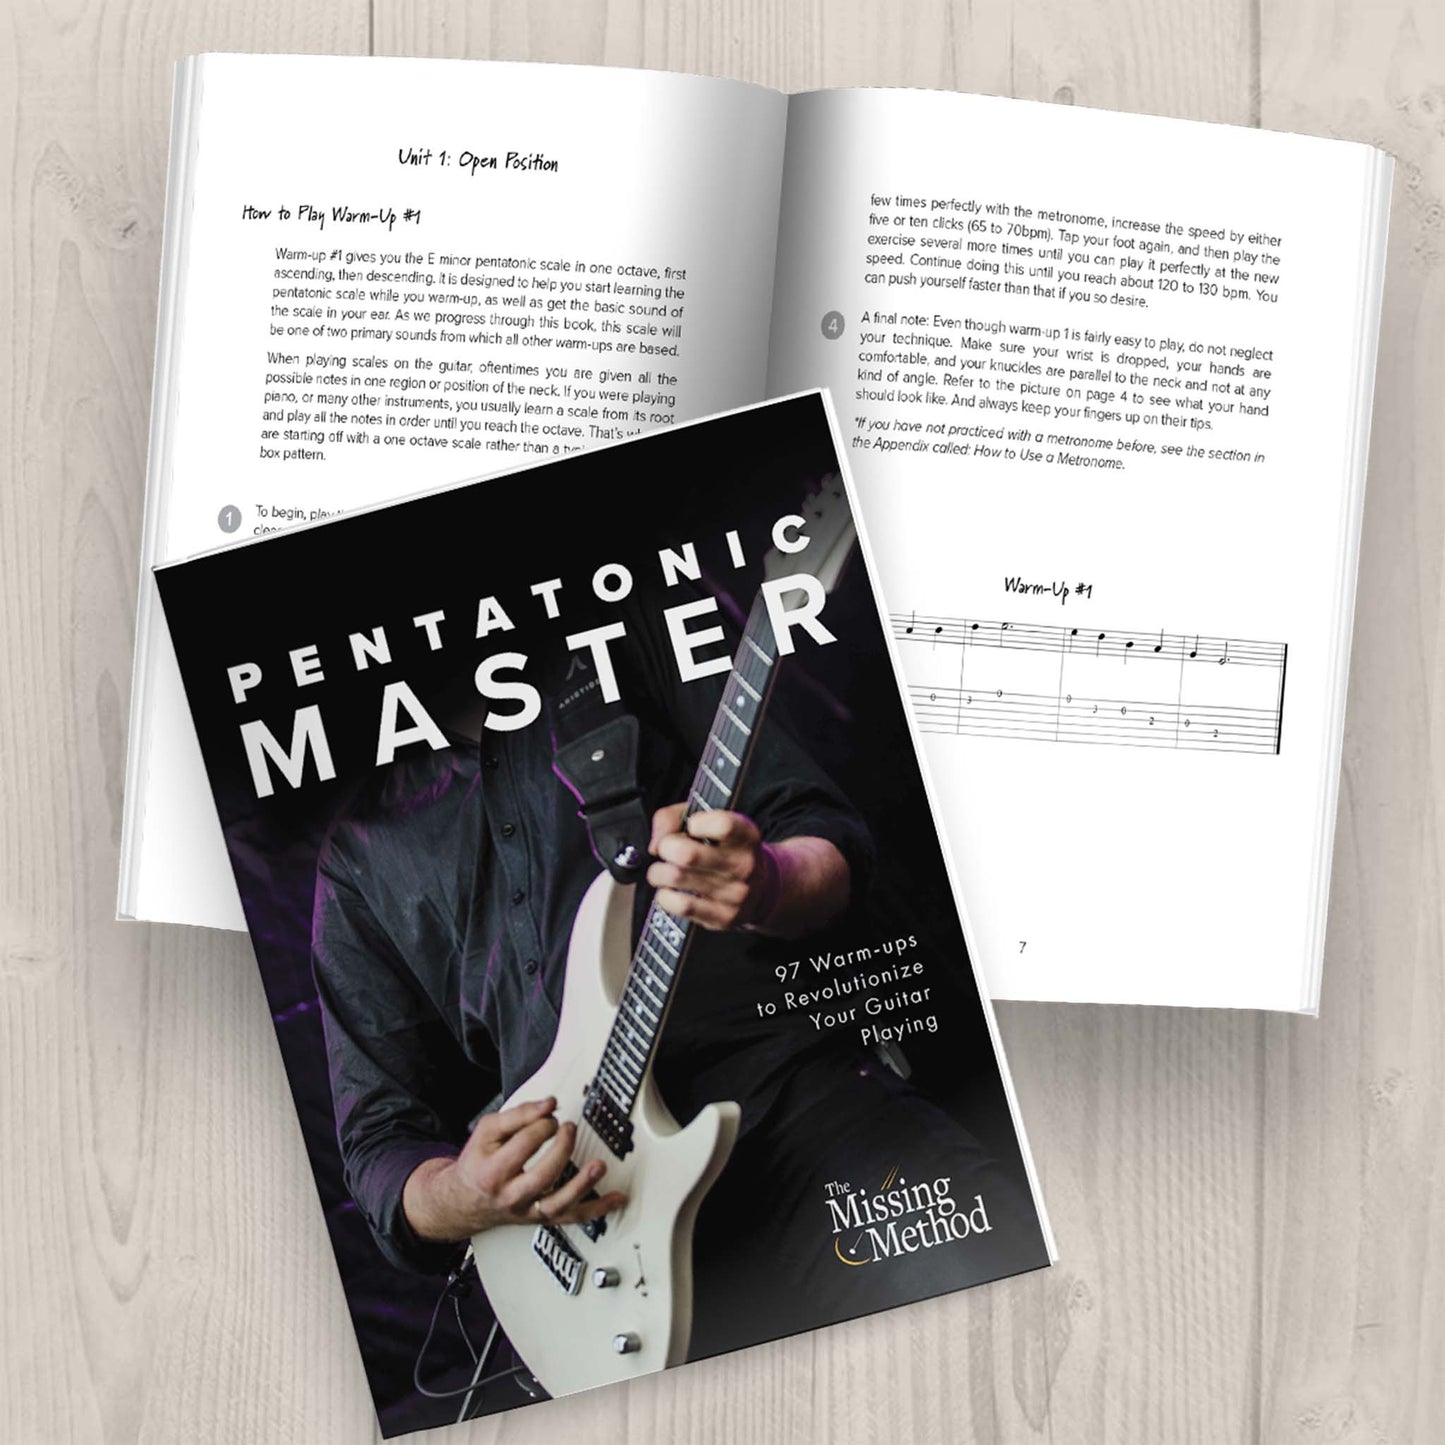 Pentatonic Master from The Missing Method for Guitar.  Two copies of the book are displayed on a table. One copy is open, displaying the first pages of the first unit. The other copy of the book is closed, displaying the front cover.